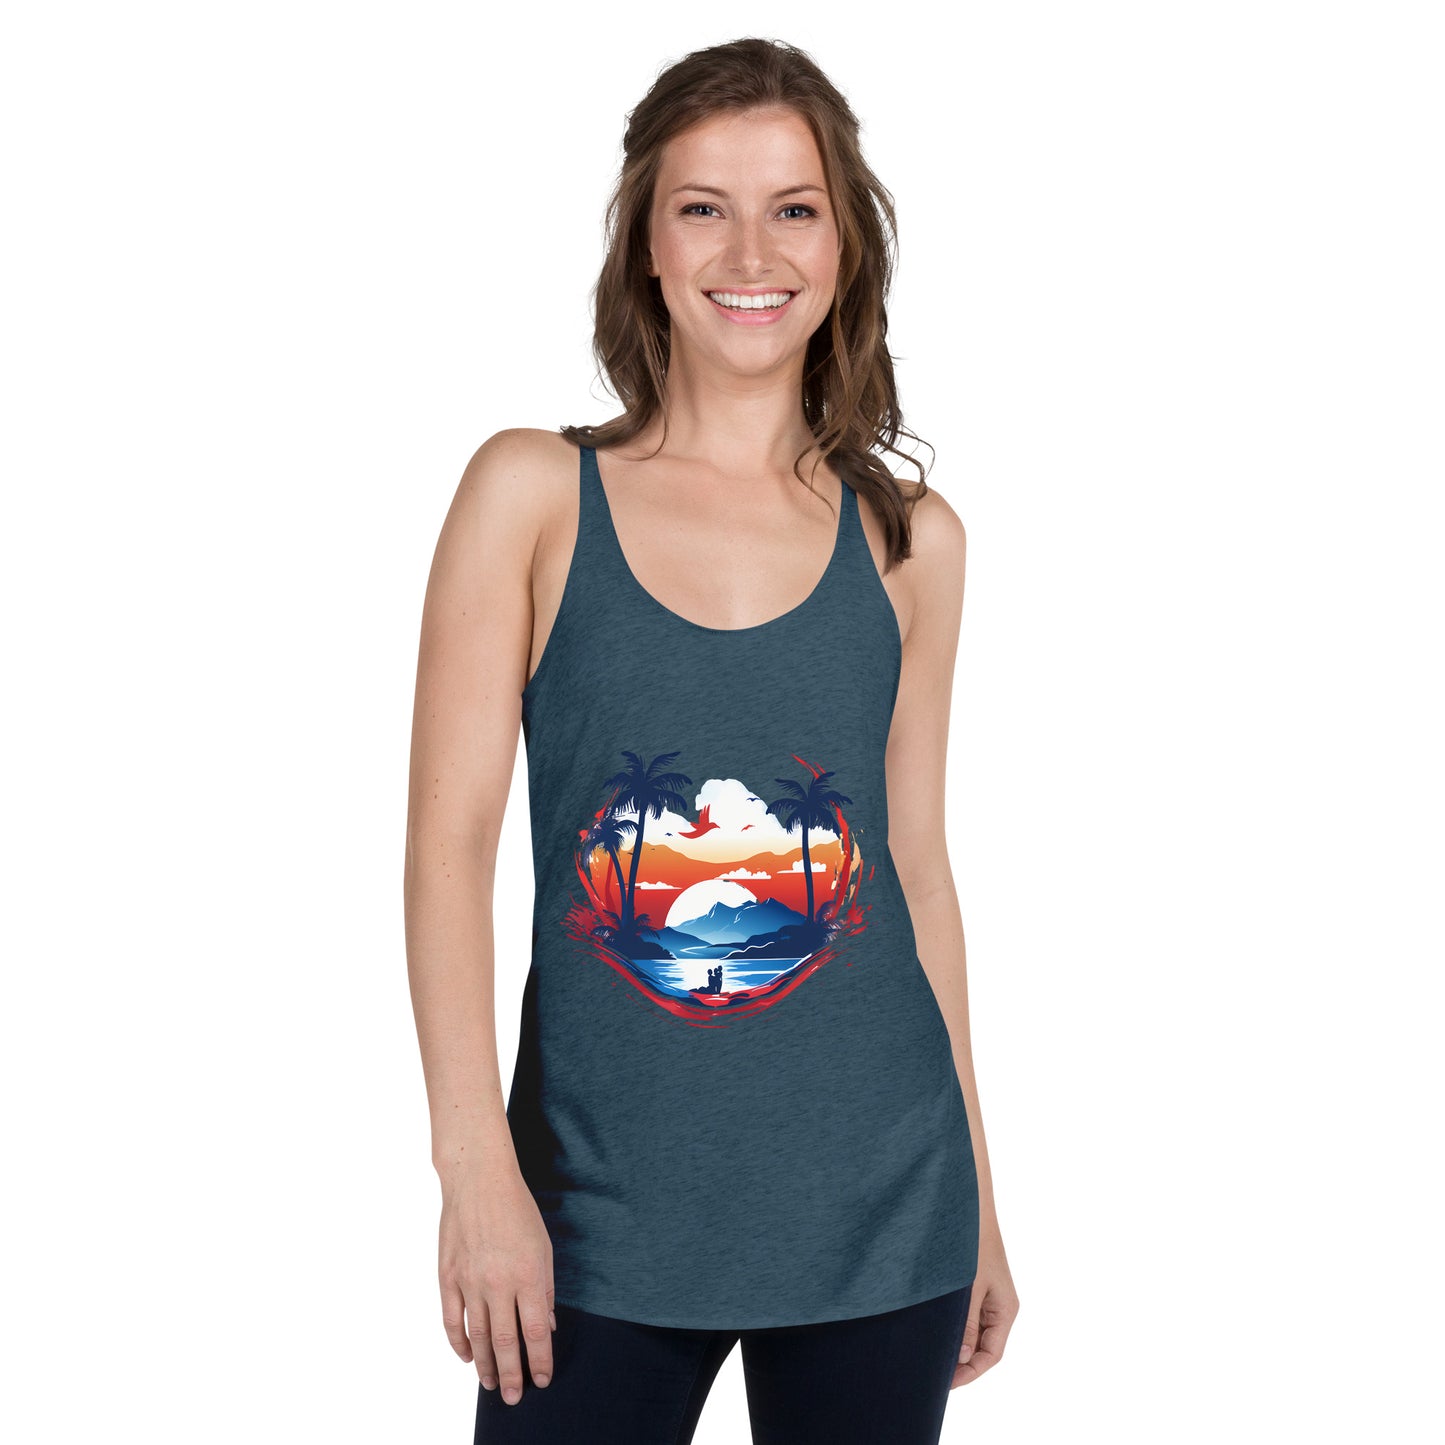 Women with indigo blue tank top with picture of sunset and palm trees